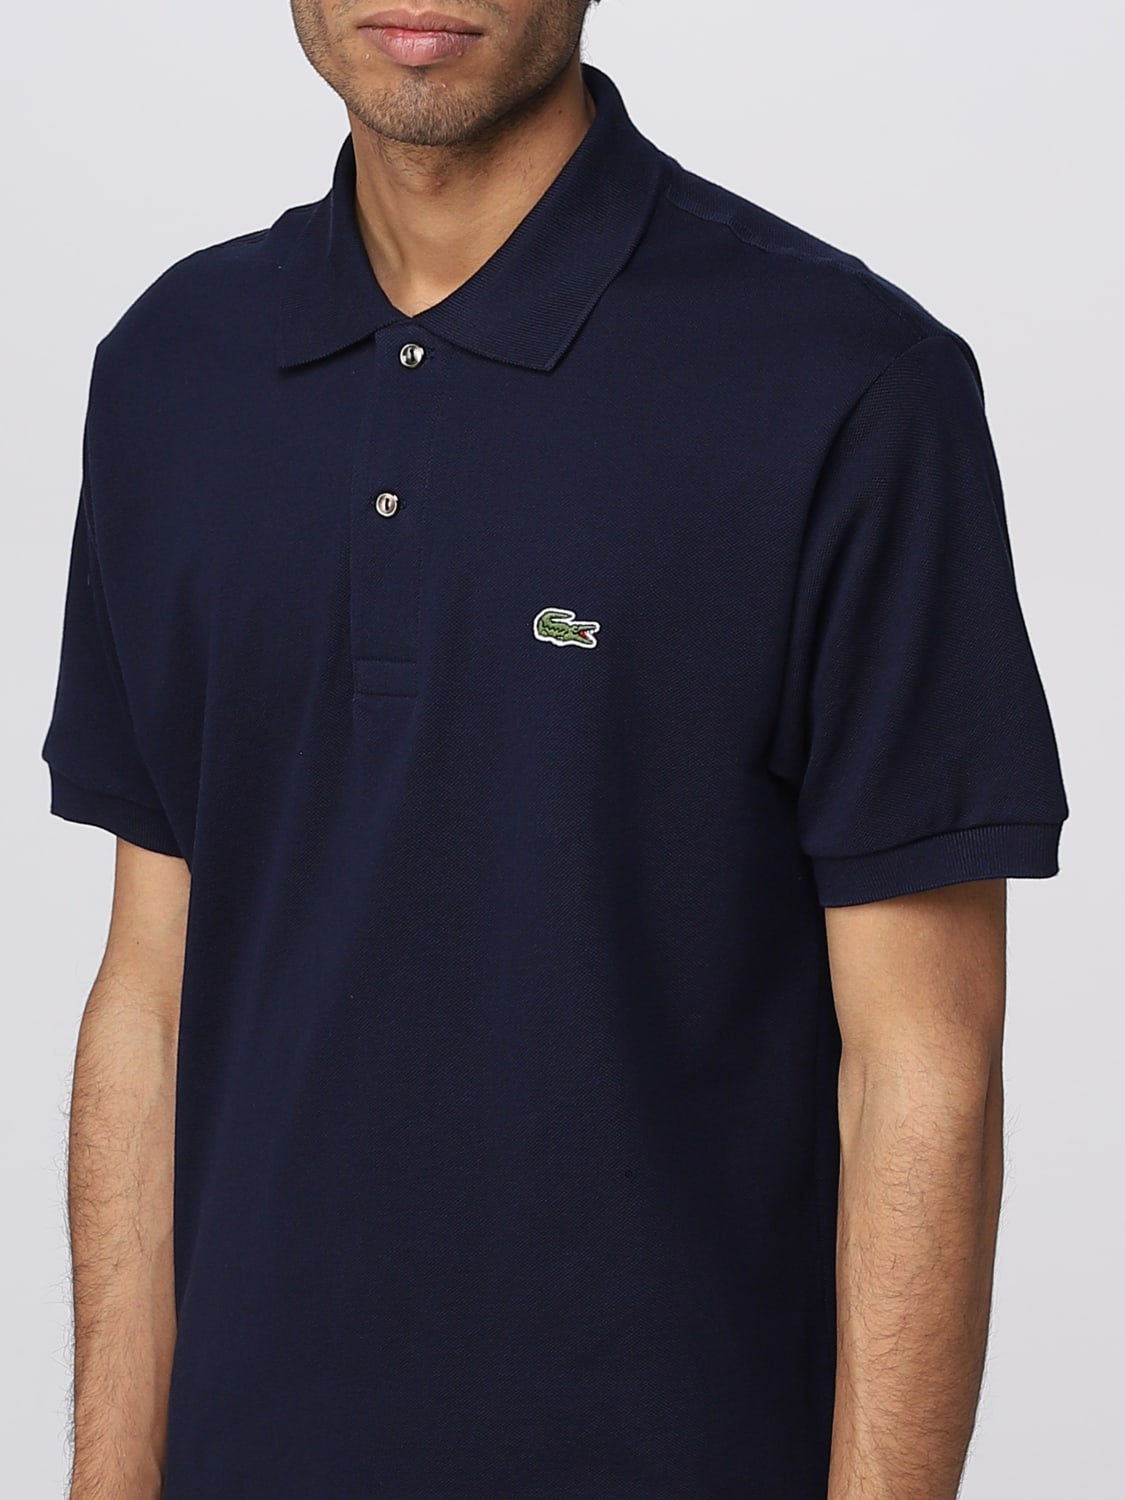 Lacoste Outlet: polo shirt at shirt Navy Lacoste man | polo online for - L1212